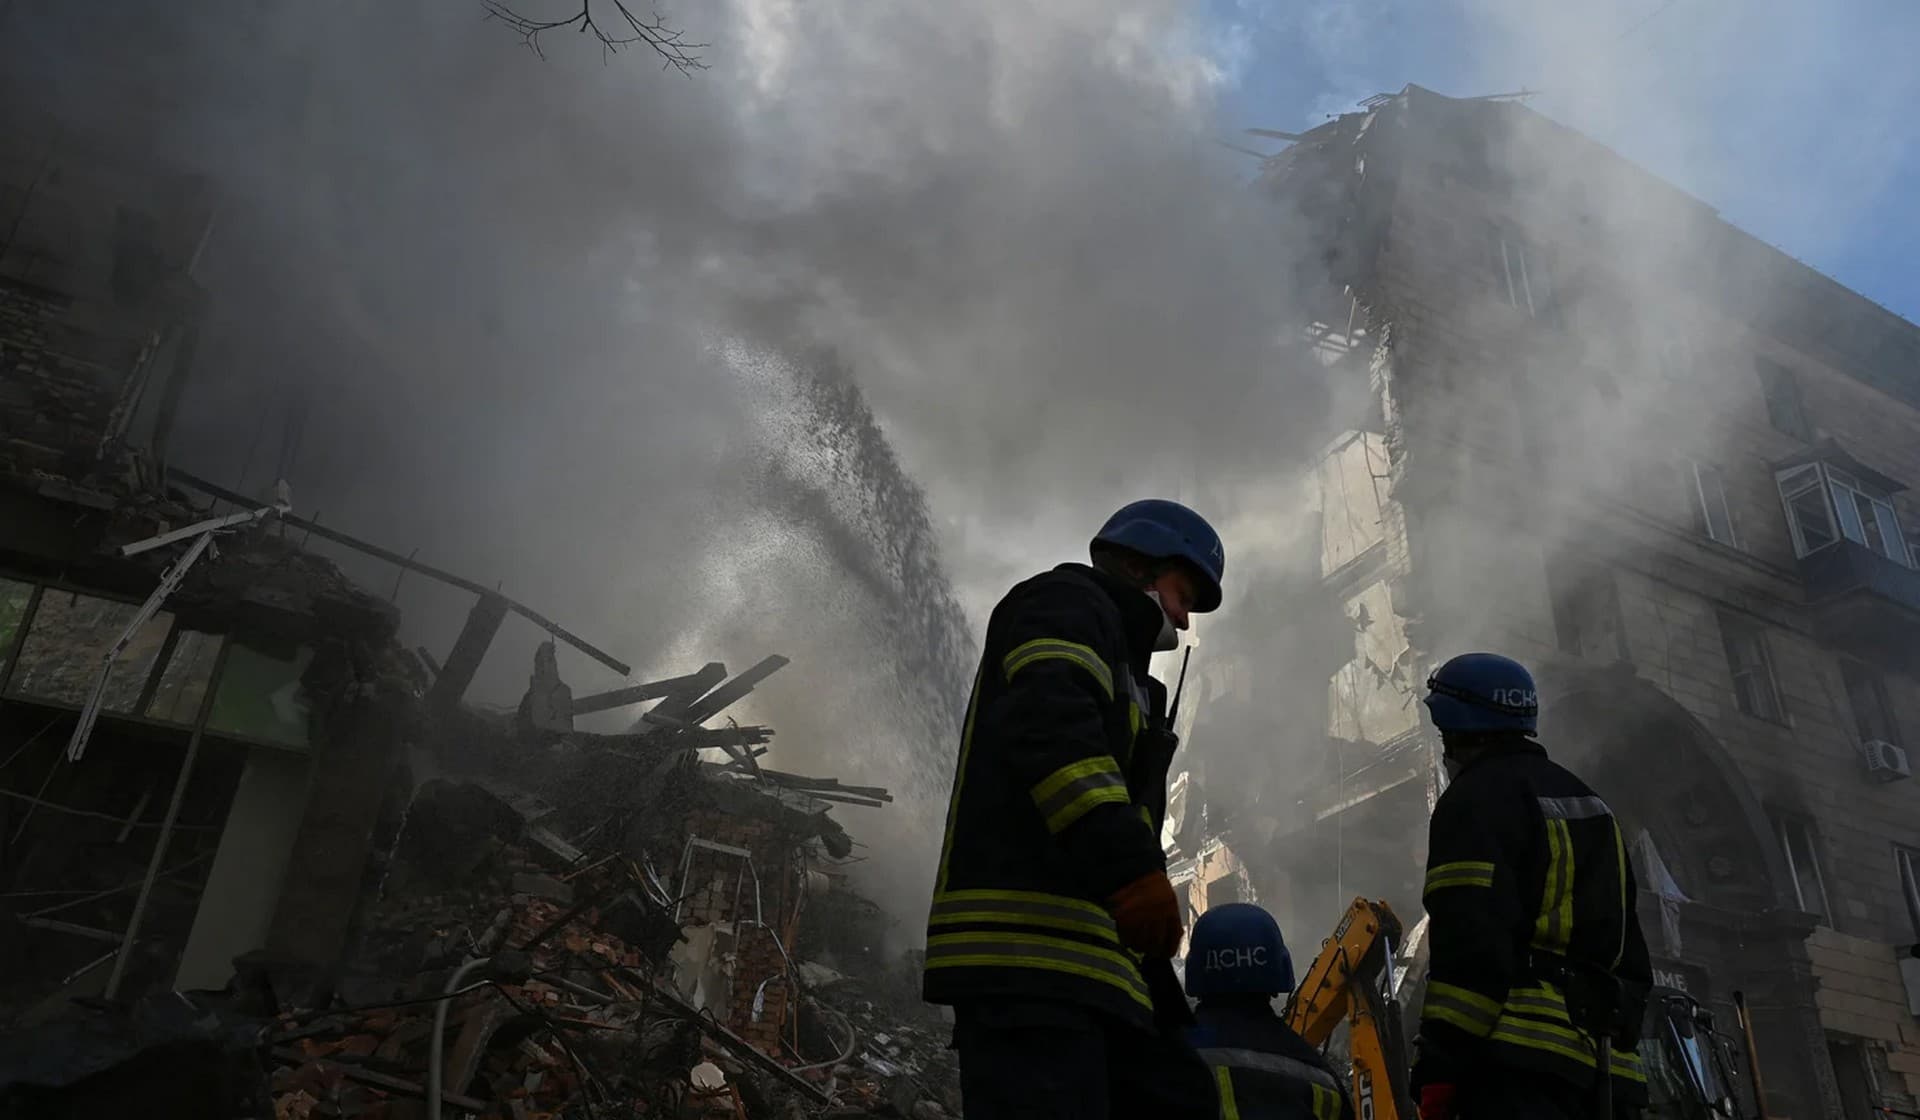 Rescuers work at the site of a residential building heavily damaged by a Russian missile strike in Zaporizhzhia